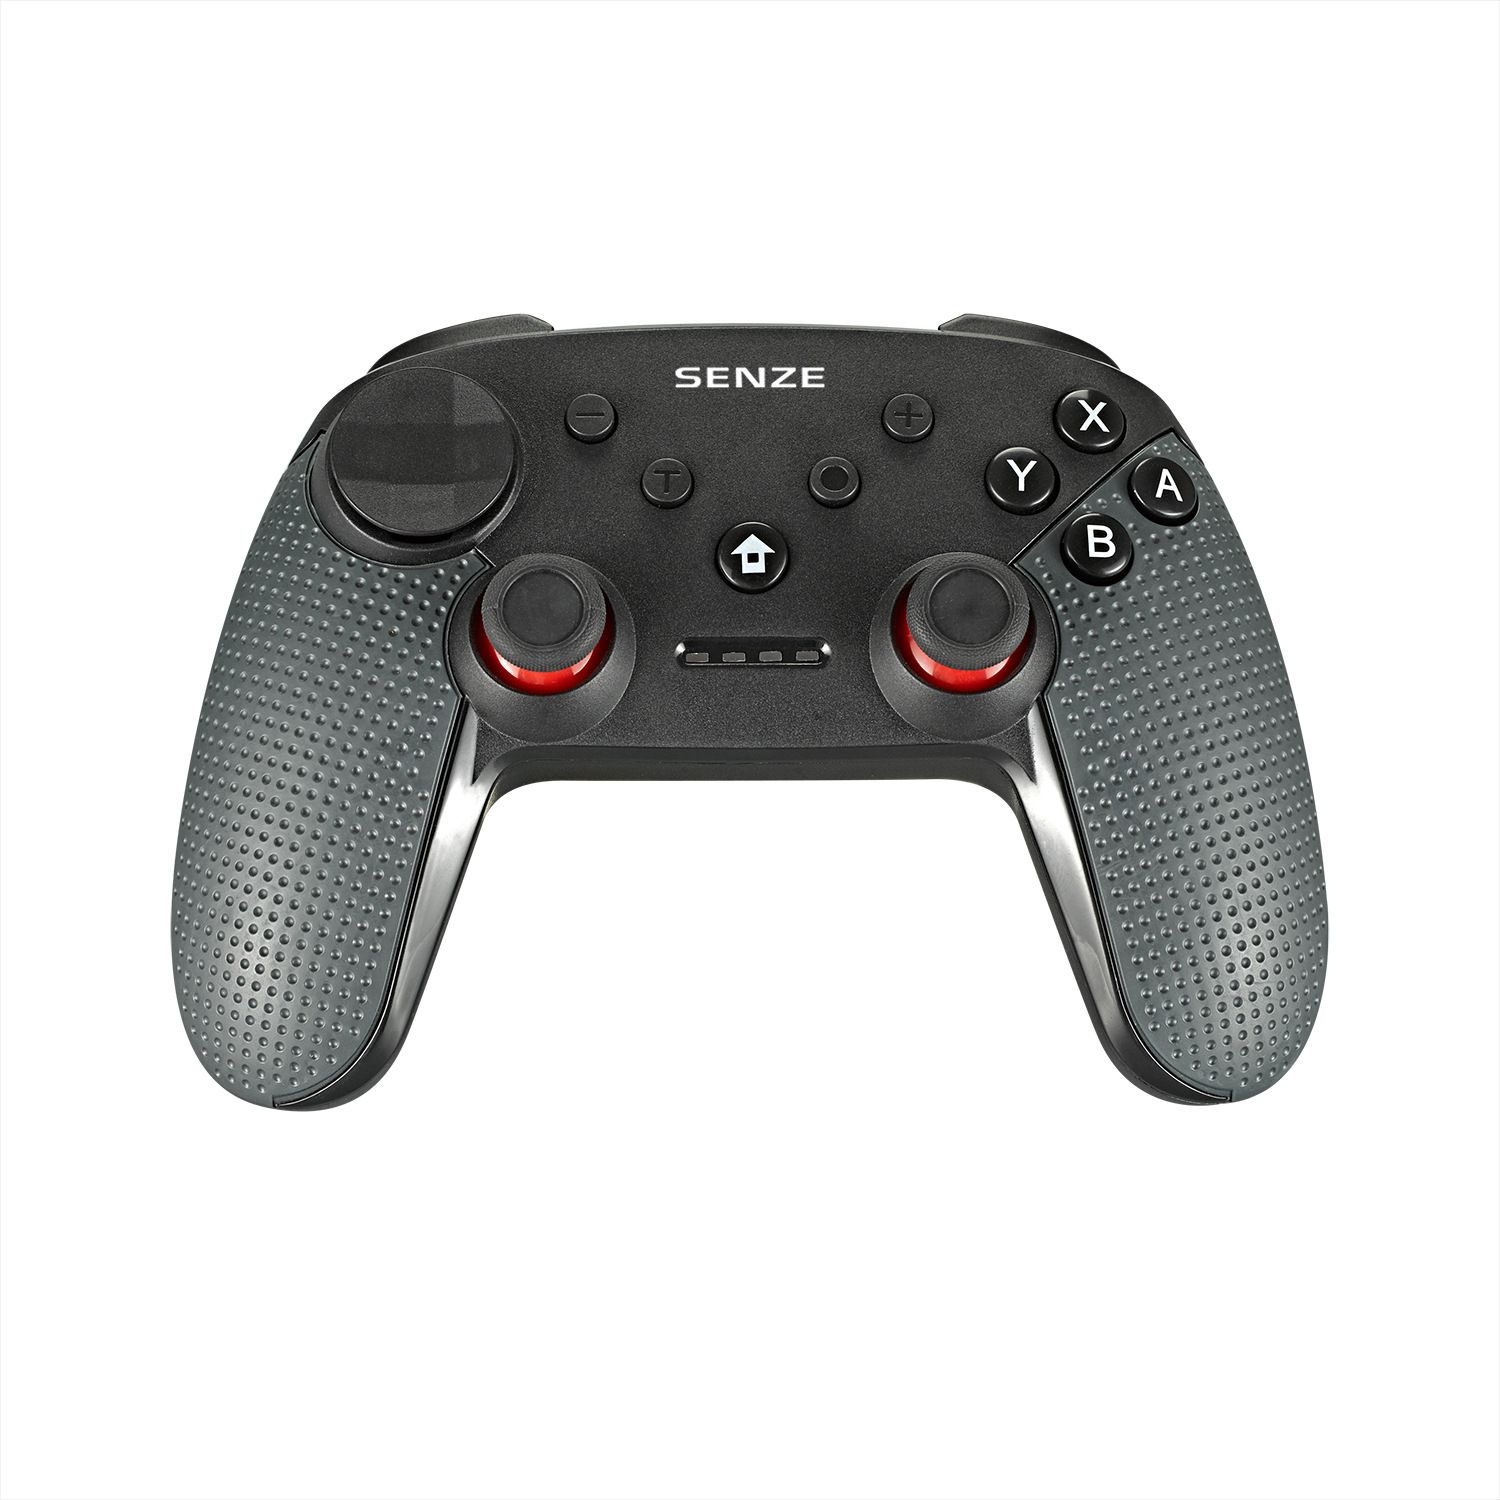 Senze-SZ-912B-bluetooth-Gamepad-for-Nintendo-Switch-Game-Controller-for-Android-for-Playstation-3-PS-1623864